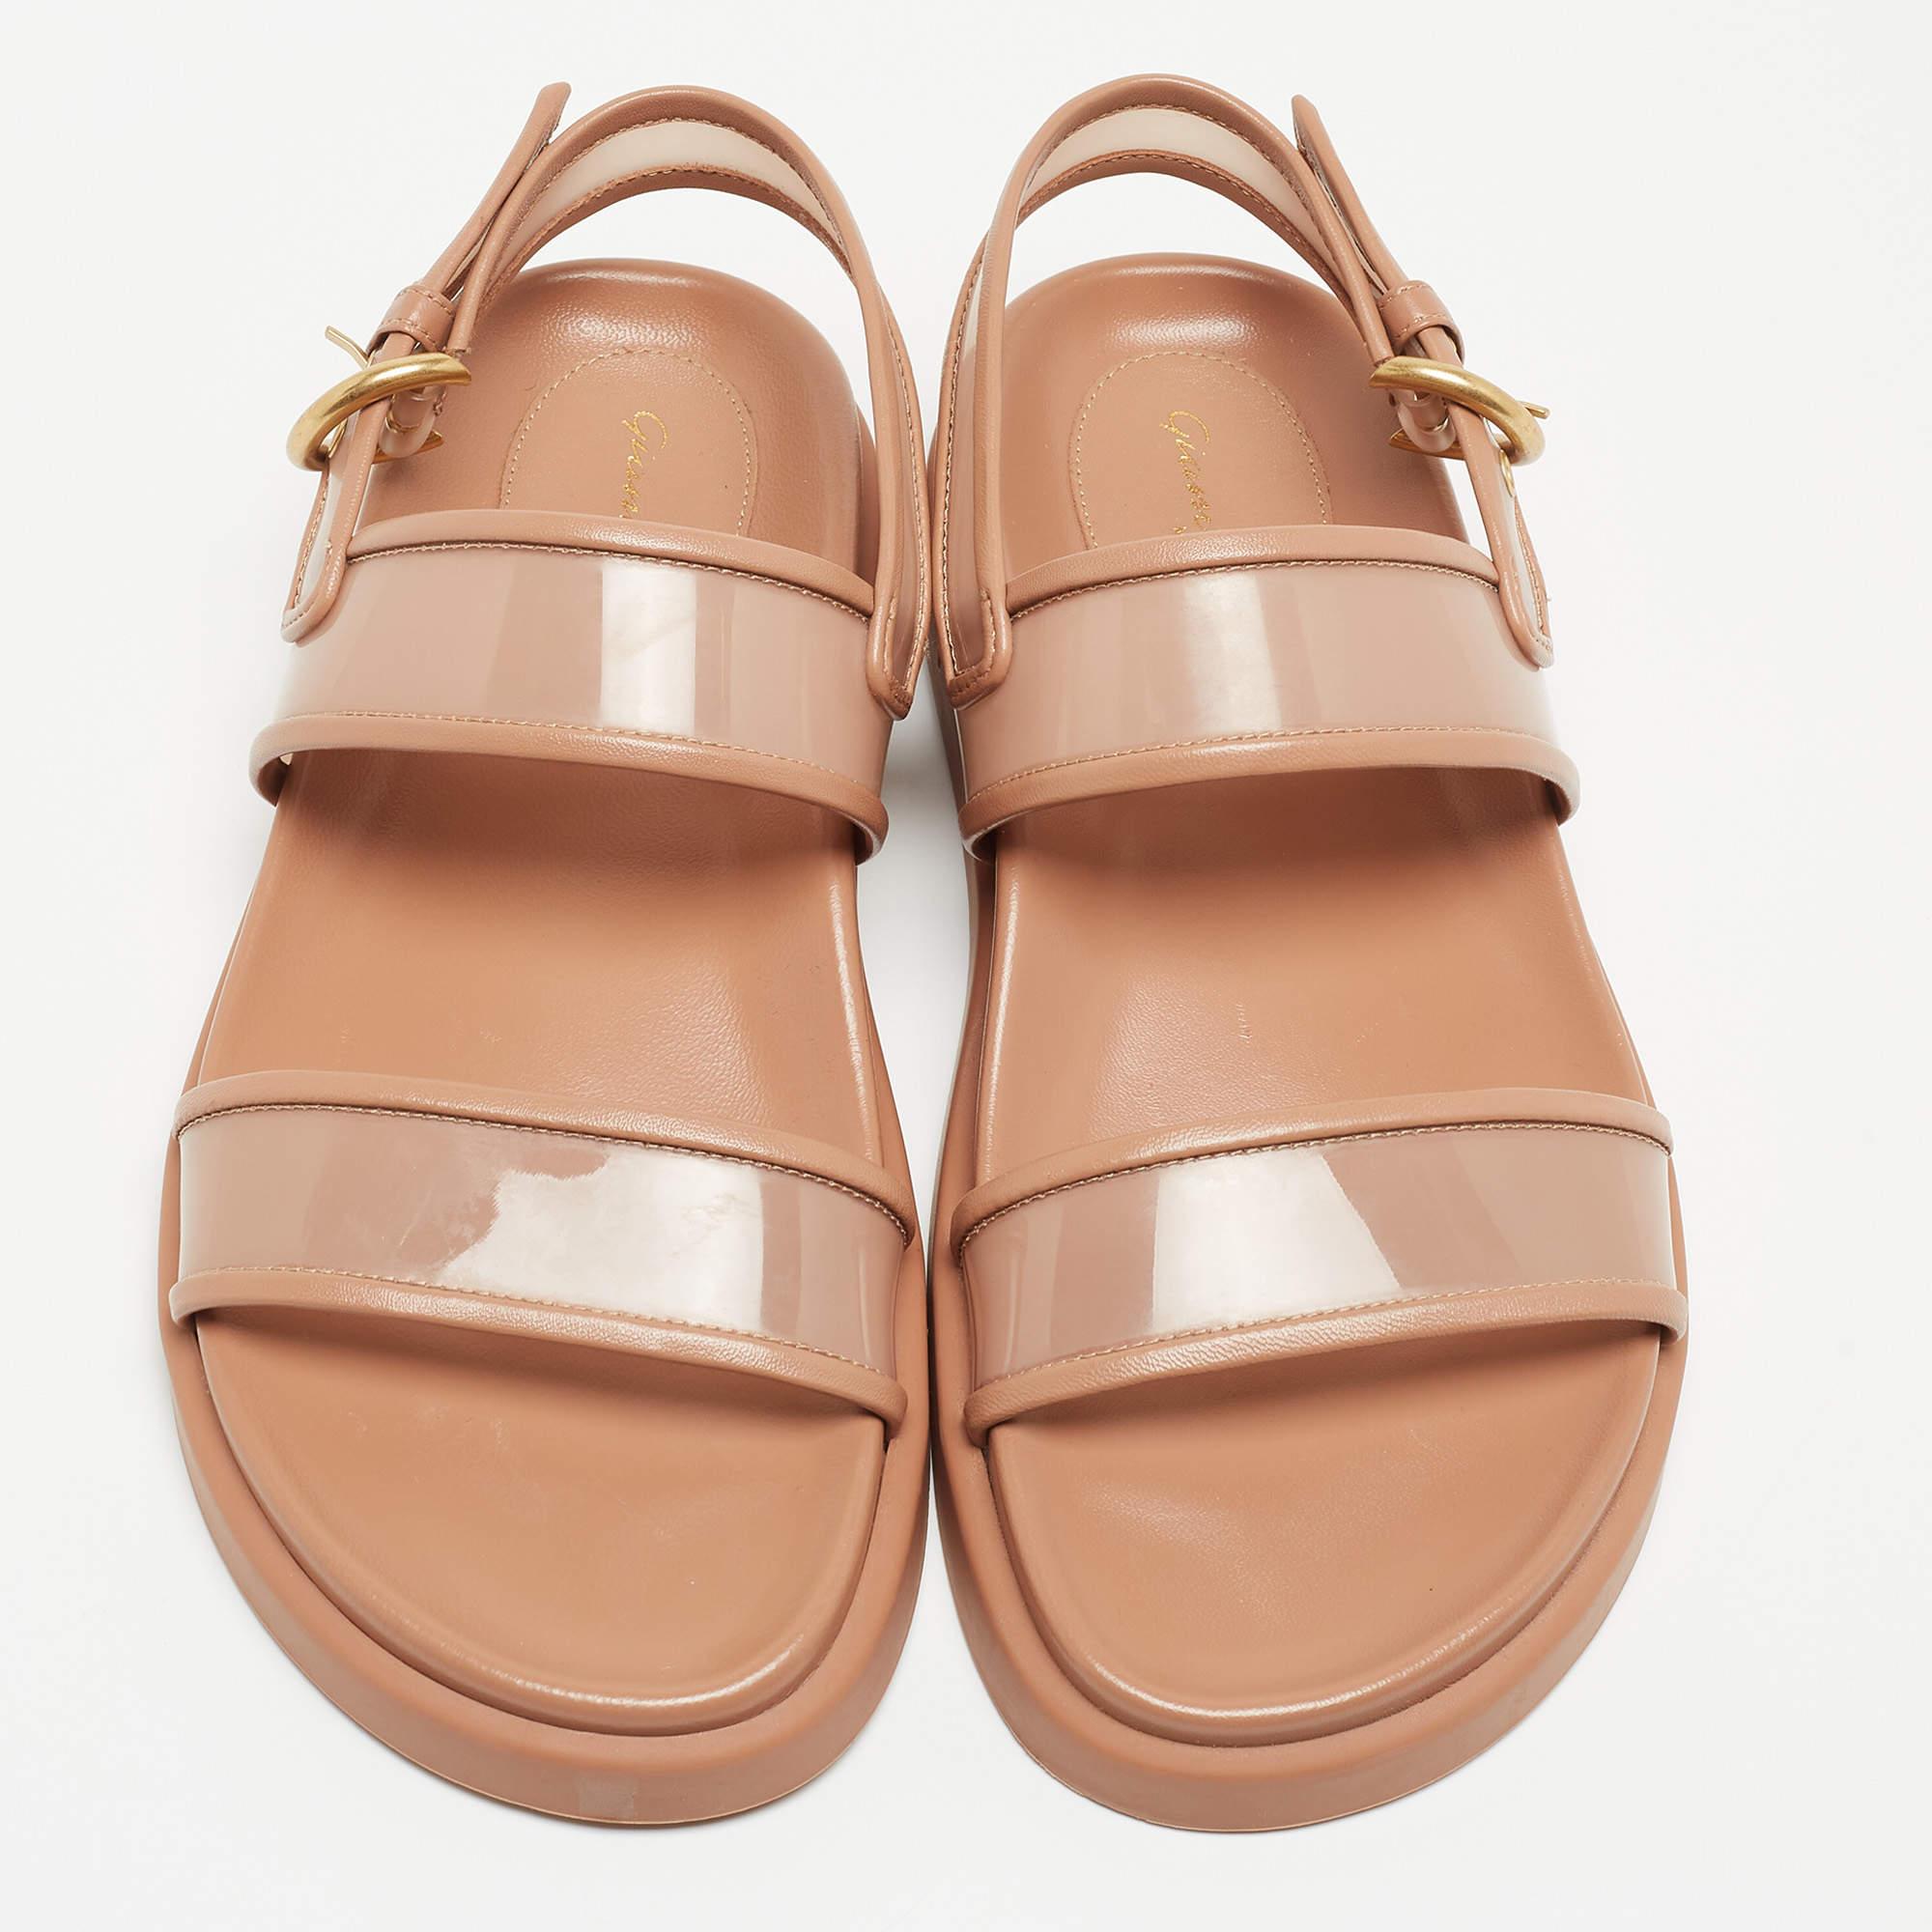 These sandals will offer you both luxury and comfort. Made from quality materials, they come in a versatile shade and are equipped with comfortable insoles.

Includes: Original Dustbag, Original Box, Info Card

